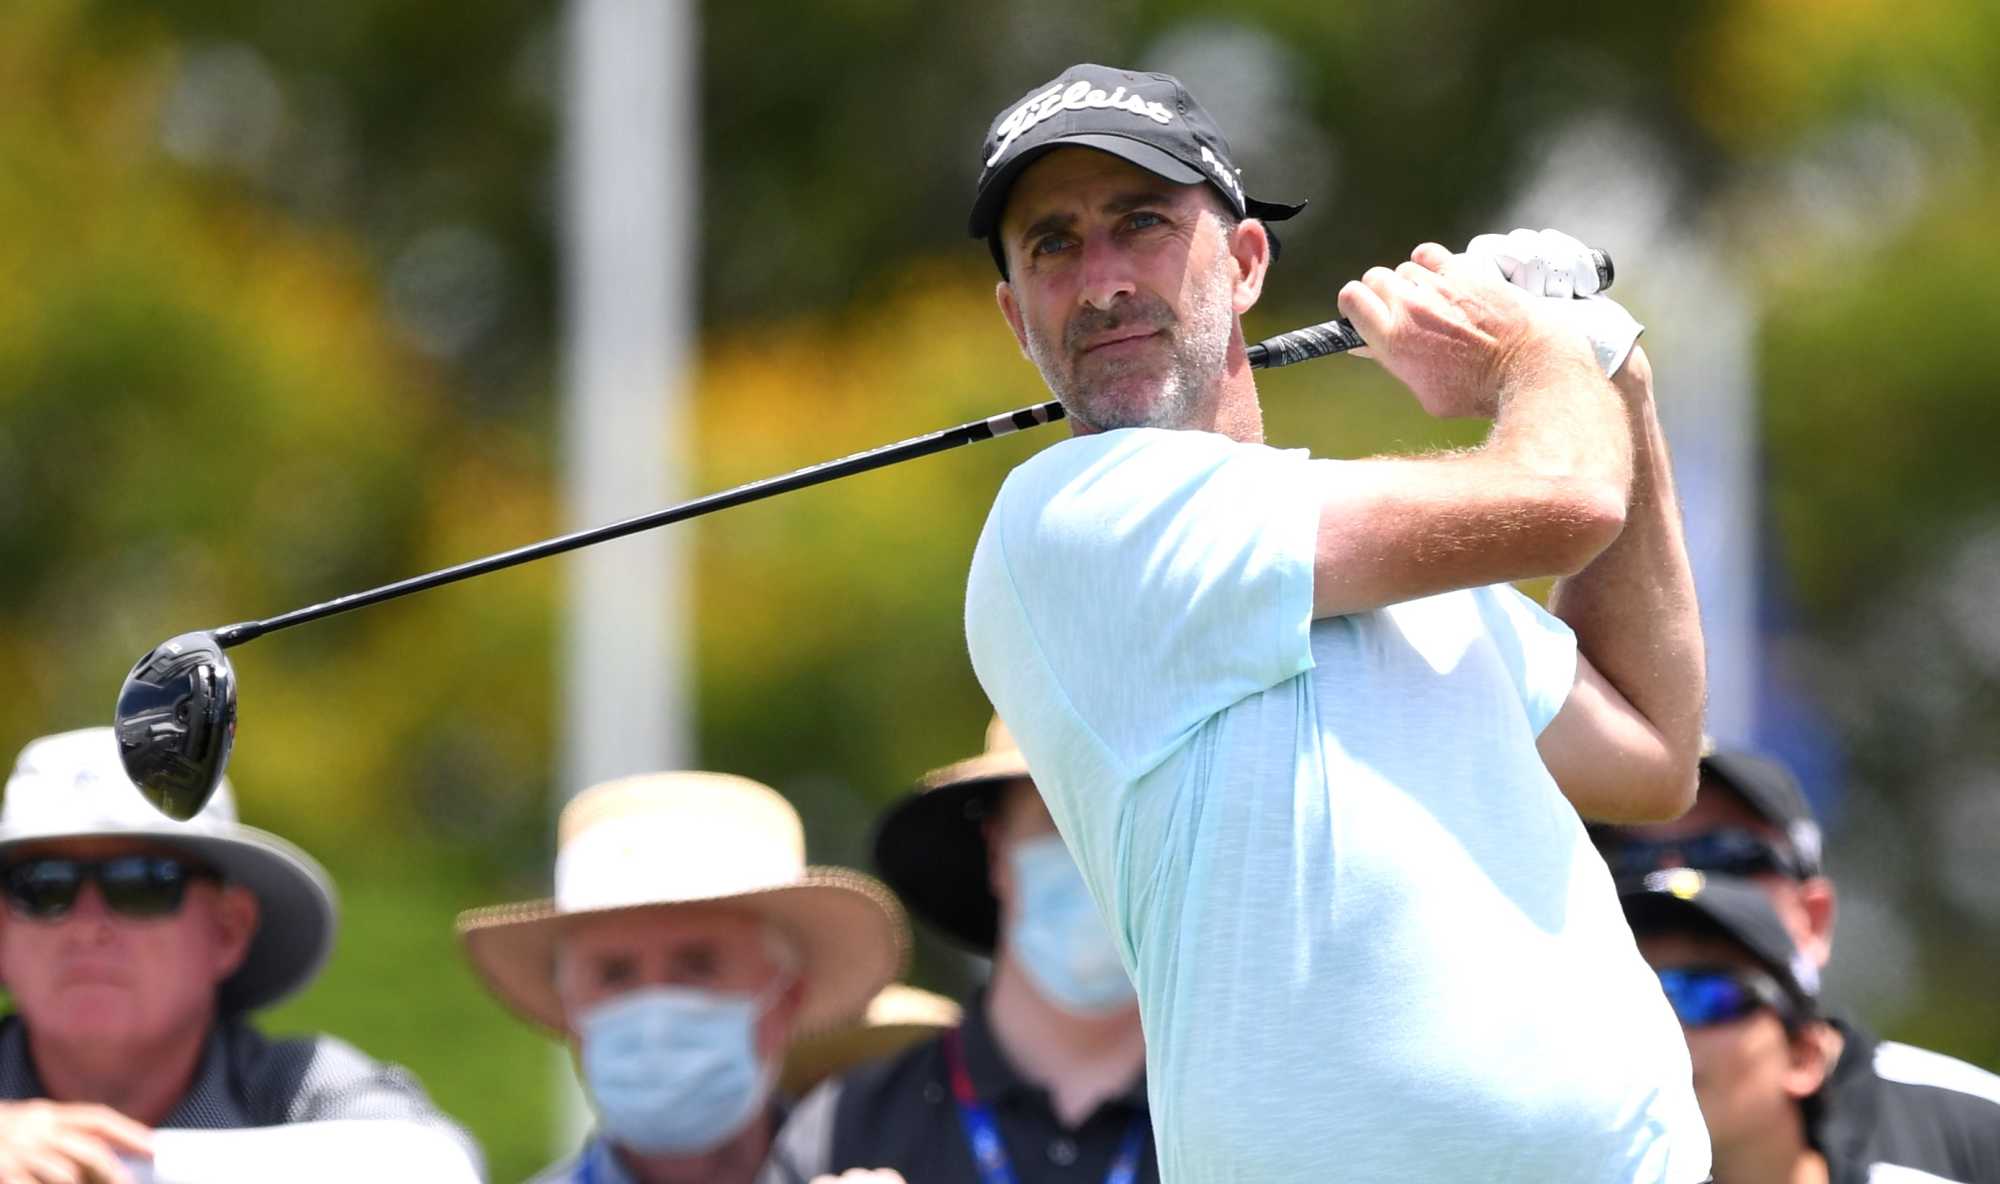 Geoff Ogilvy plays hosts and headlines the field this week.